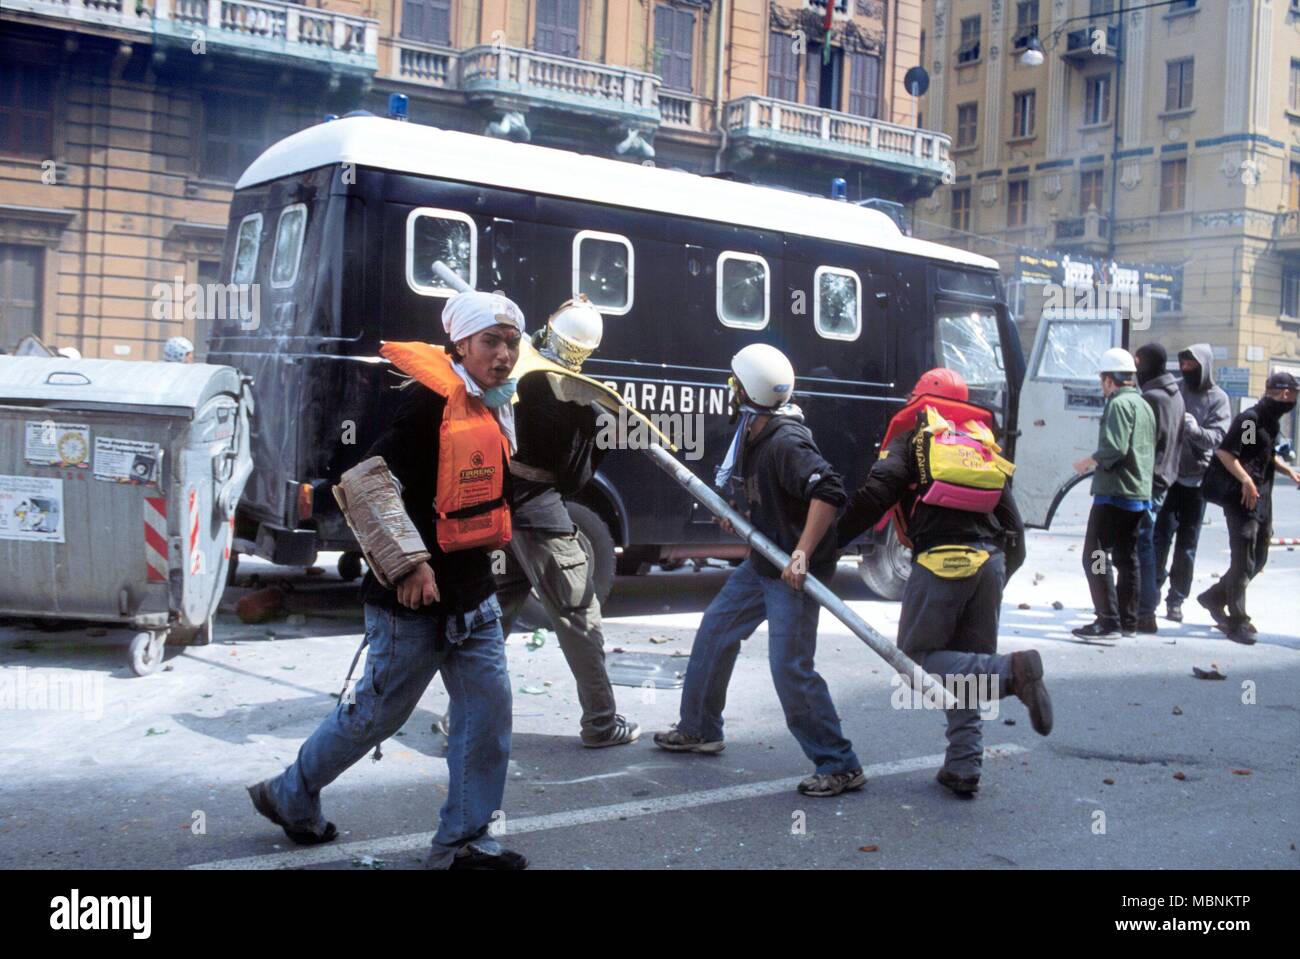 protest against the international G8 summit in Genoa (Italy), July 2001, assault on a Carabinieri van Stock Photo